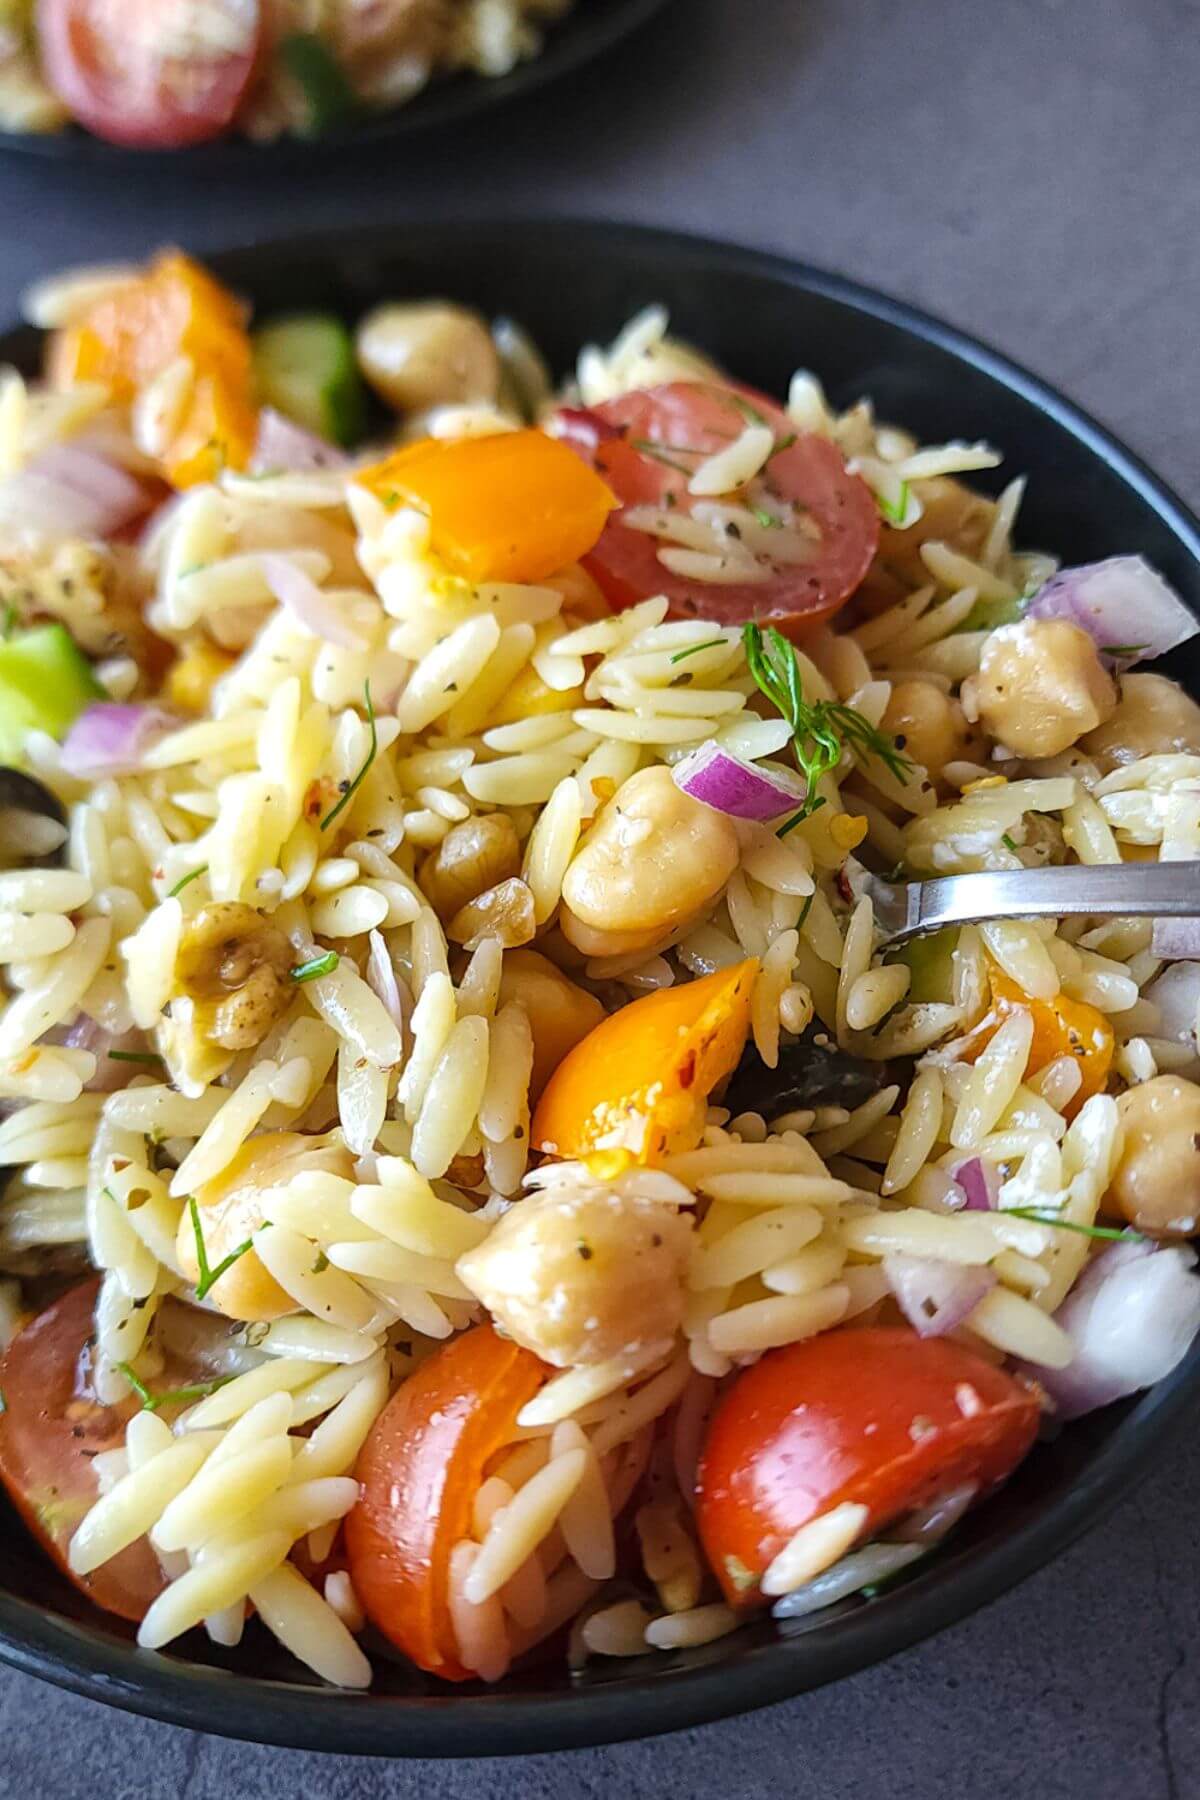 Orzo salad with feta in a black bowl.